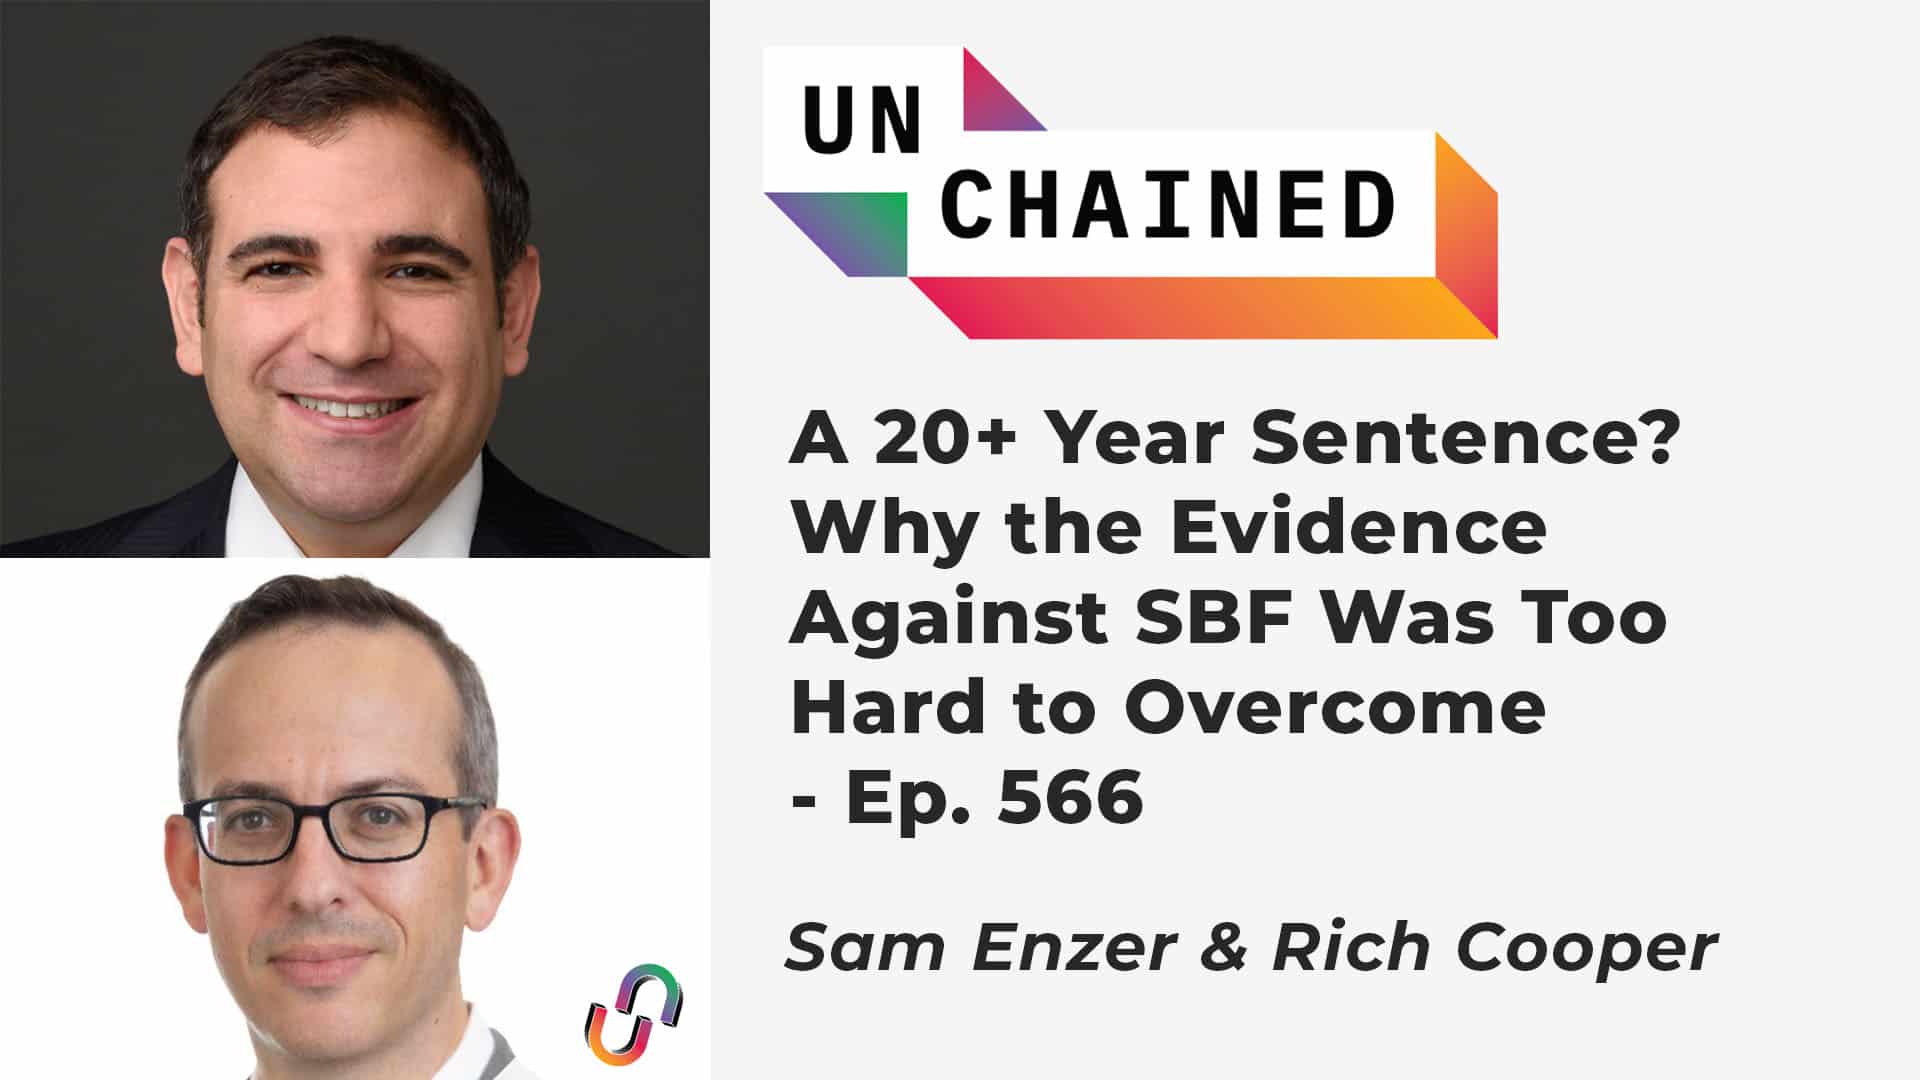 A 20+ Year Sentence? Why the Evidence Against SBF Was Too Hard to Overcome - Ep. 566